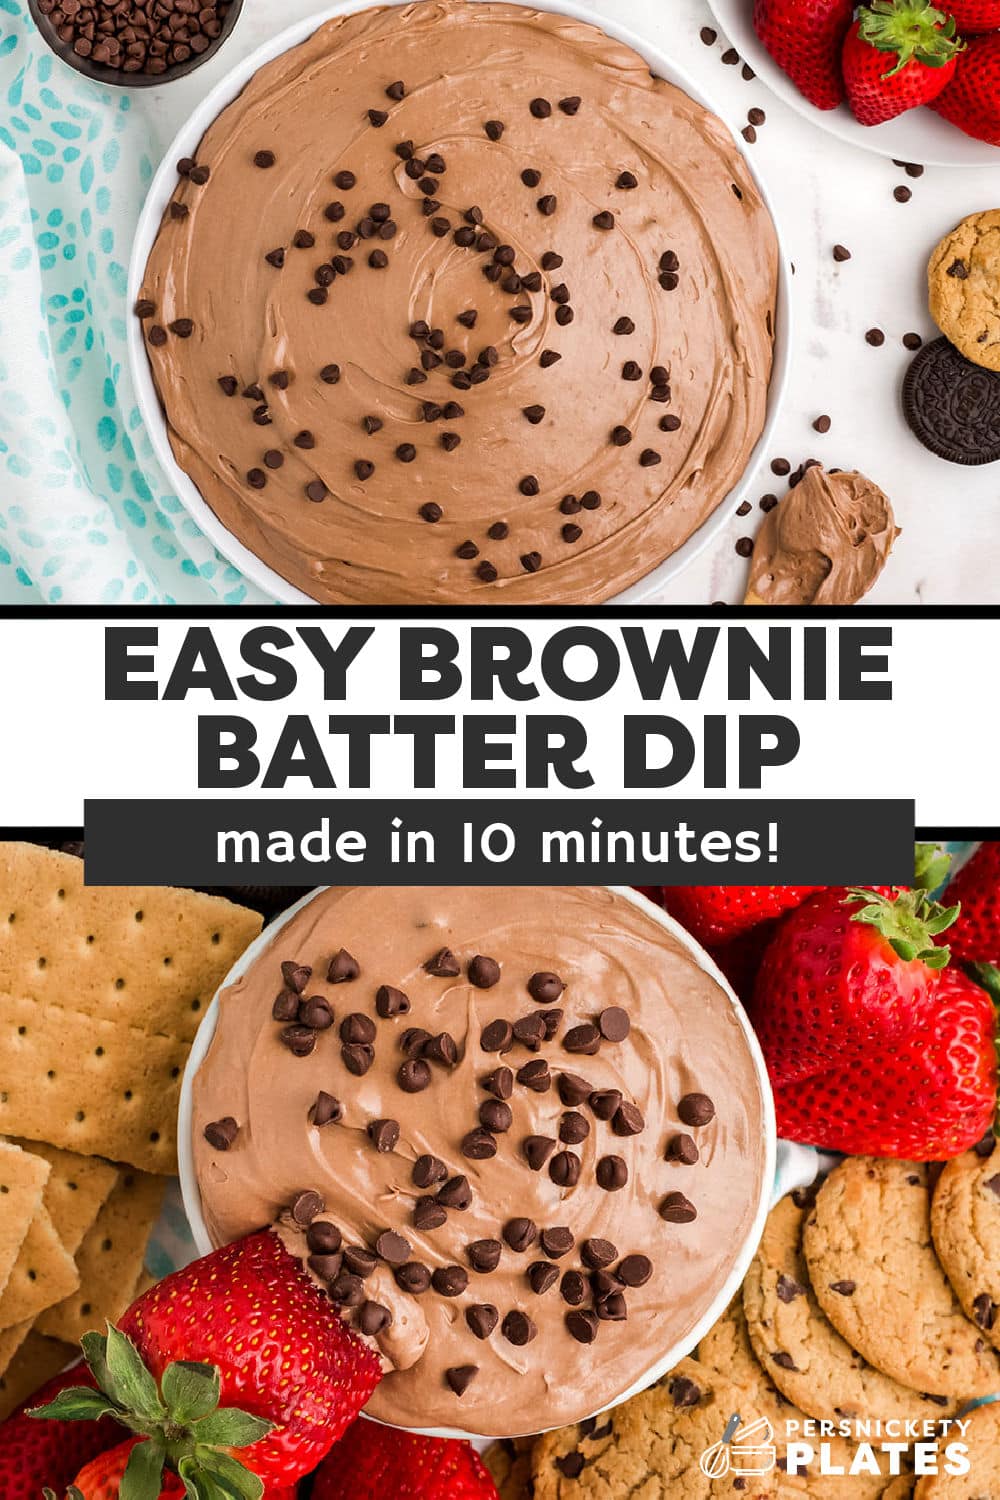 Easy brownie batter dip is the perfect dessert dip for your next family movie night or when you need a quick and easy chocolate craving fix! This no-bake dip is made in 10 minutes without any raw eggs and is creamy, luscious, and perfectly safe to eat. Serve with fresh fruit, cookies, pretzels, and any of your favorite dippers! | www.persnicketyplates.com